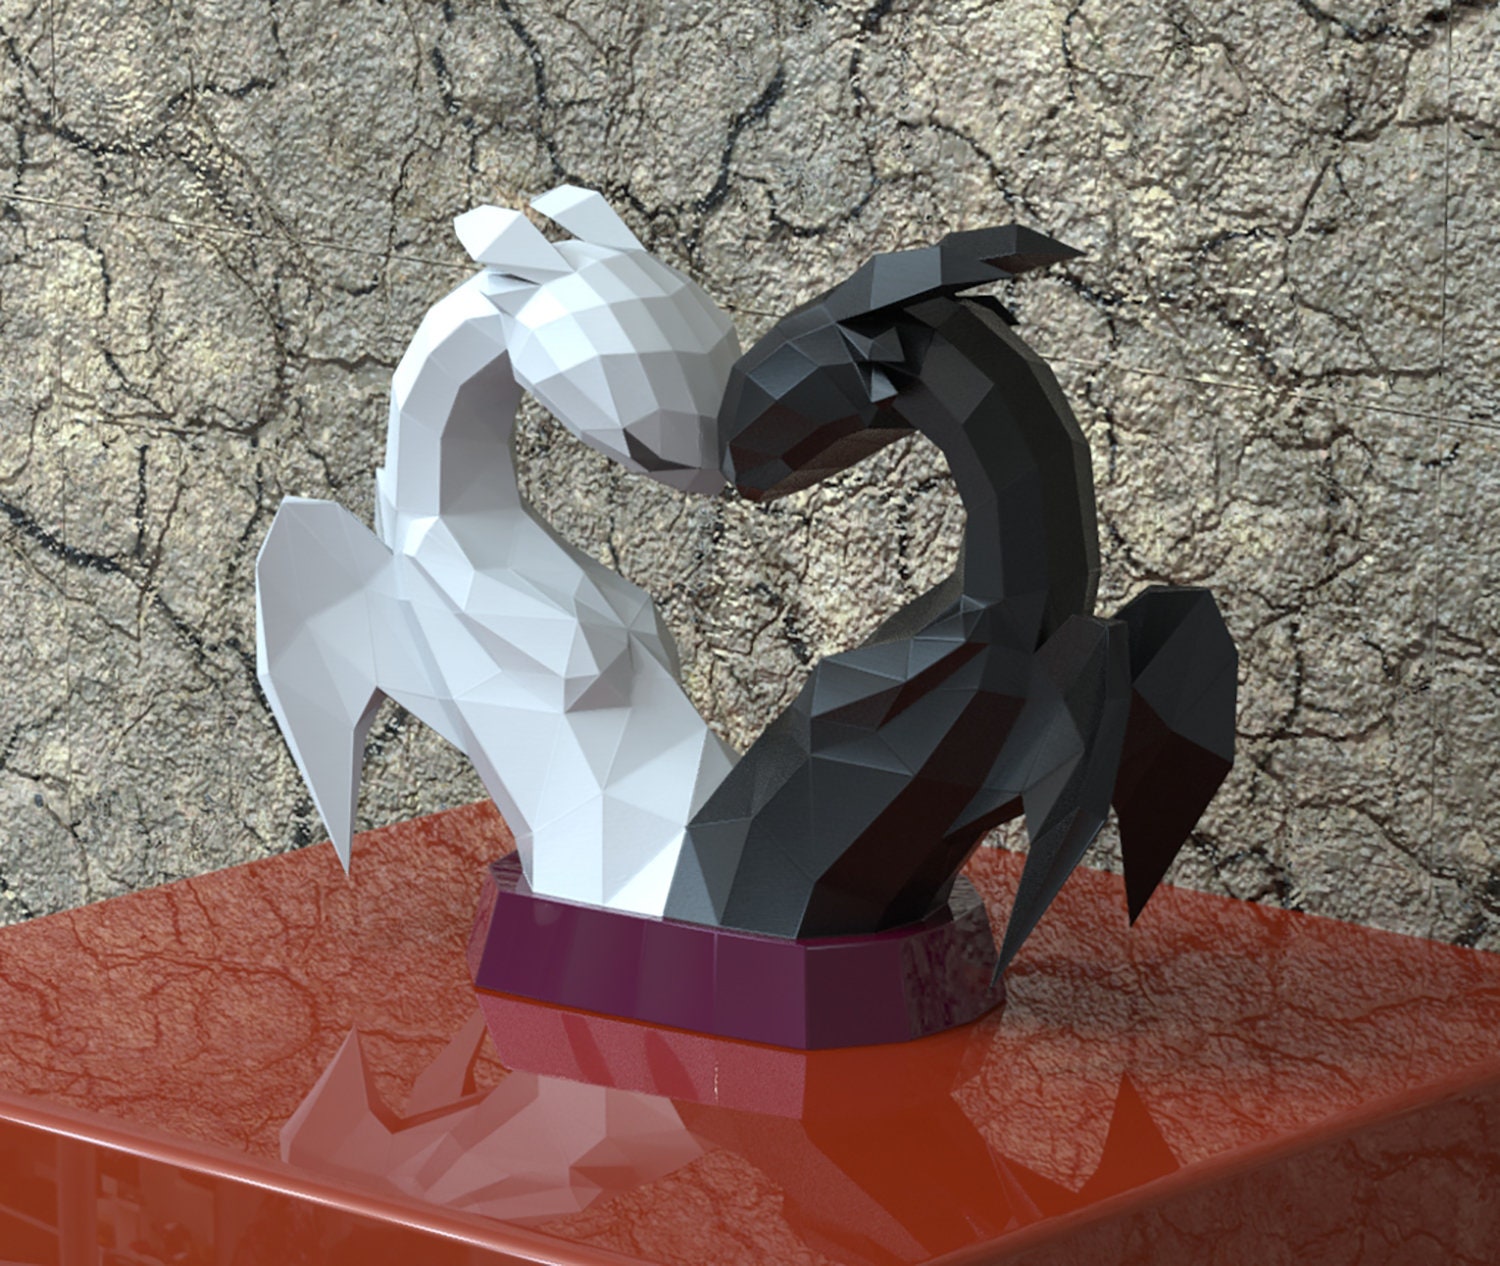 papercraft toothless and light fury, papercraft toothless, diy papercraft, diy papercraft dragon, beautiful papercraft, papercraft gifts, low poly toothless, paper model toothless, toothless, paper sculpture dragon, best papercraft design, best diy dragon, dragon gift, dragon art